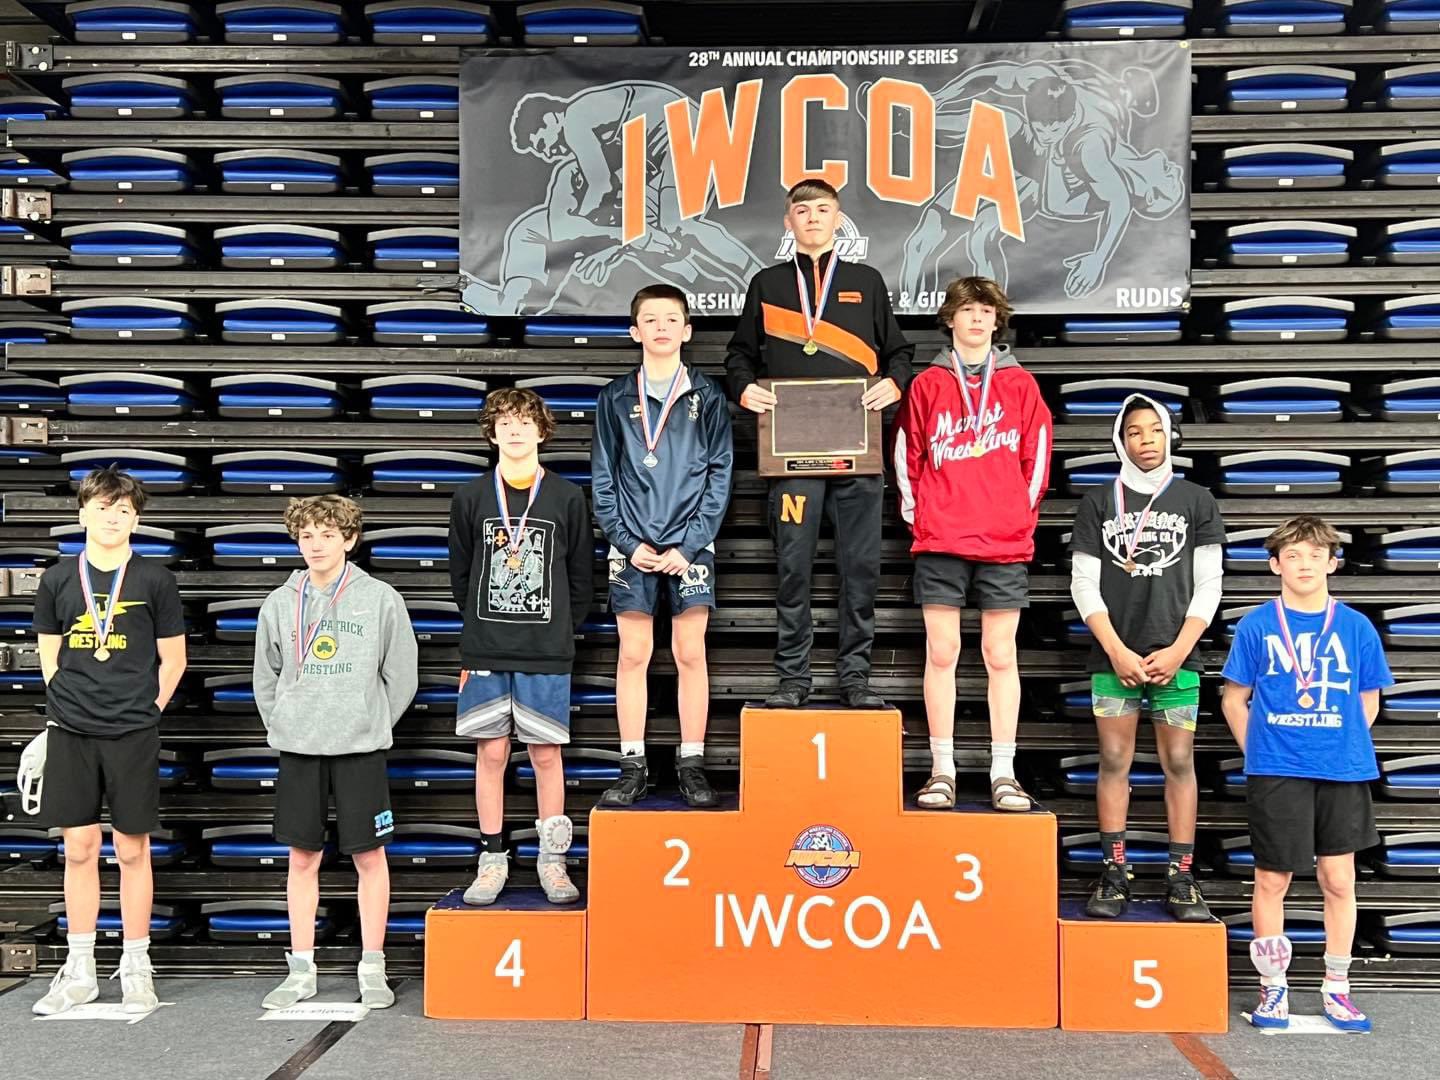 IWCOA+State+Championships%3A+Soney+claims+second+consecutive+wrestling+title%2C+Mayes+takes+Second+at+2nd